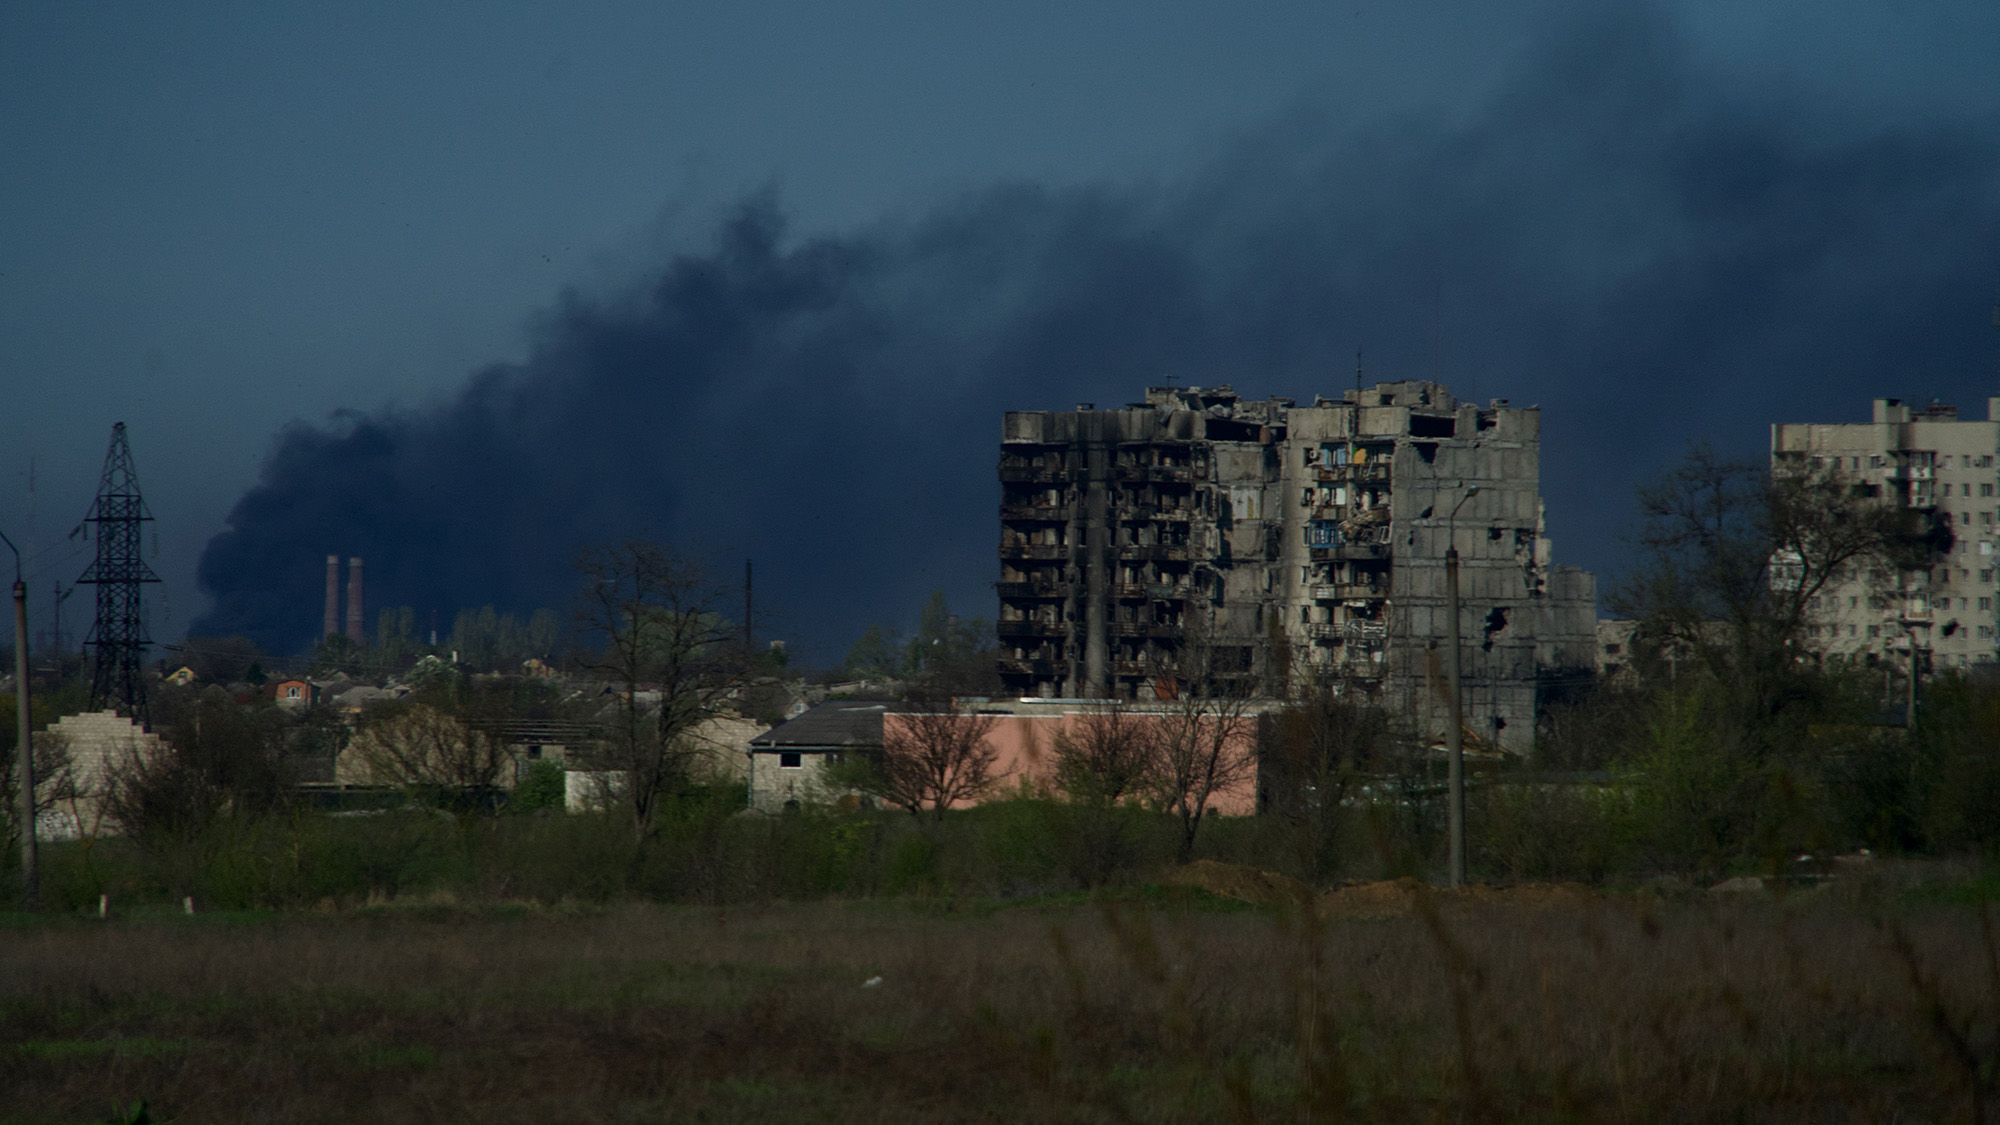 Smoke rises from the grounds of the Azovstal steel plant in Mariupol, Ukraine on April 29.